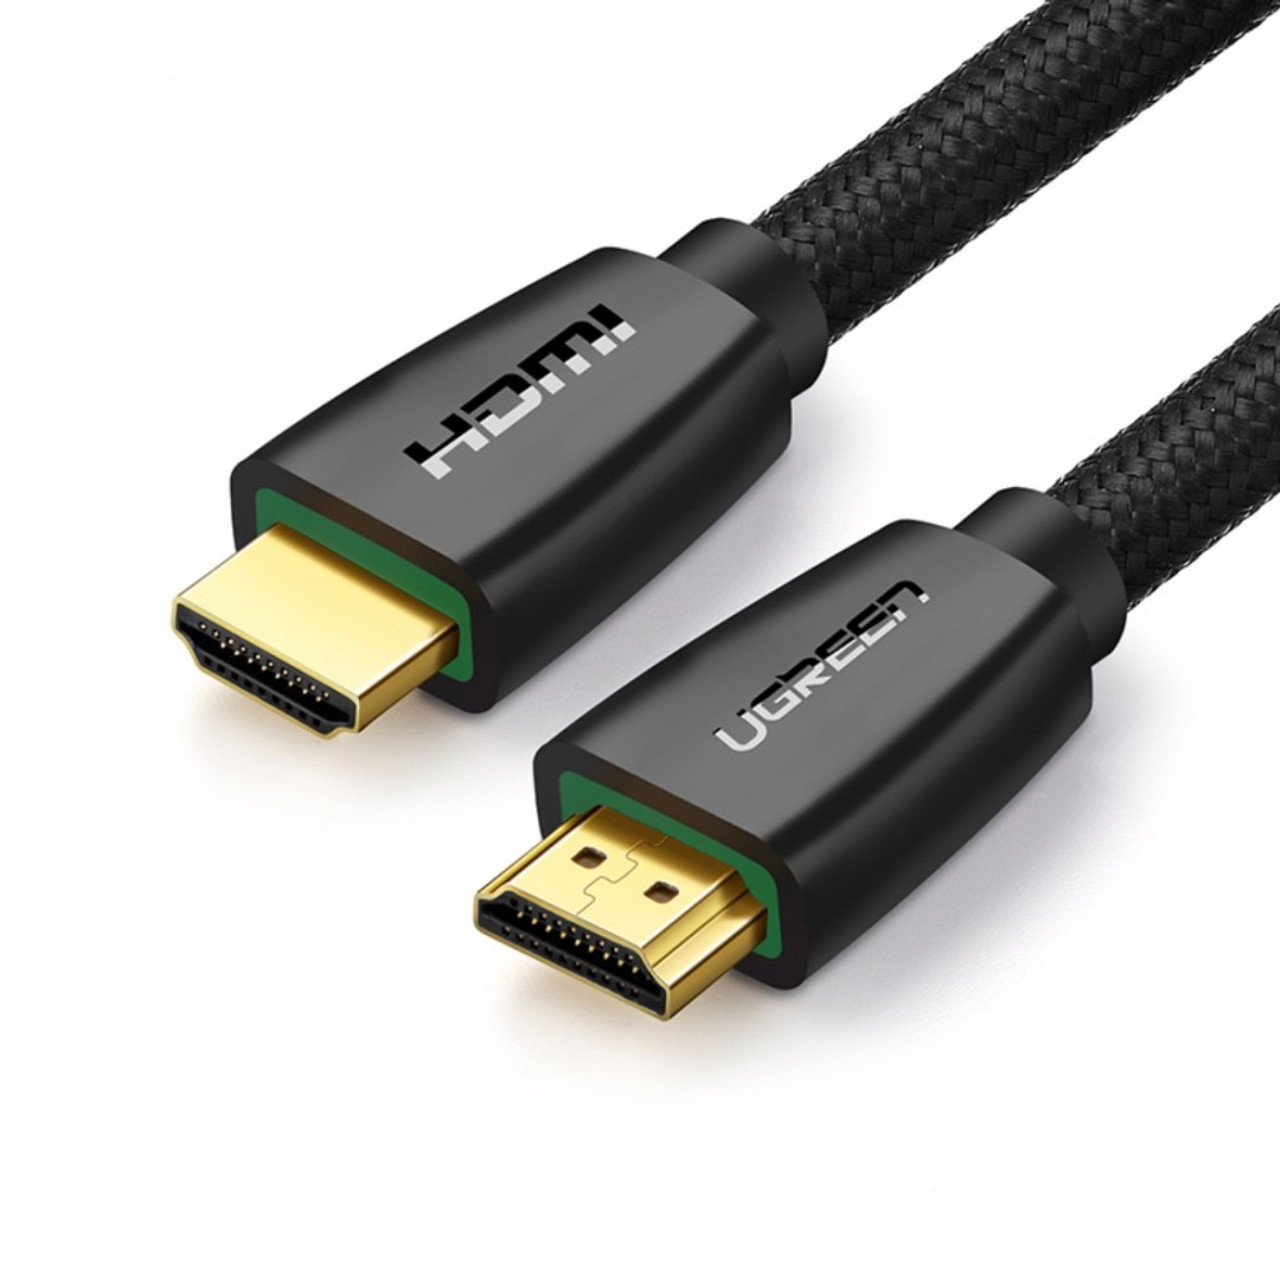 UGreen HDMI Male to Male 3m Cable - Black, 40411, AYOUB COMPUTERS